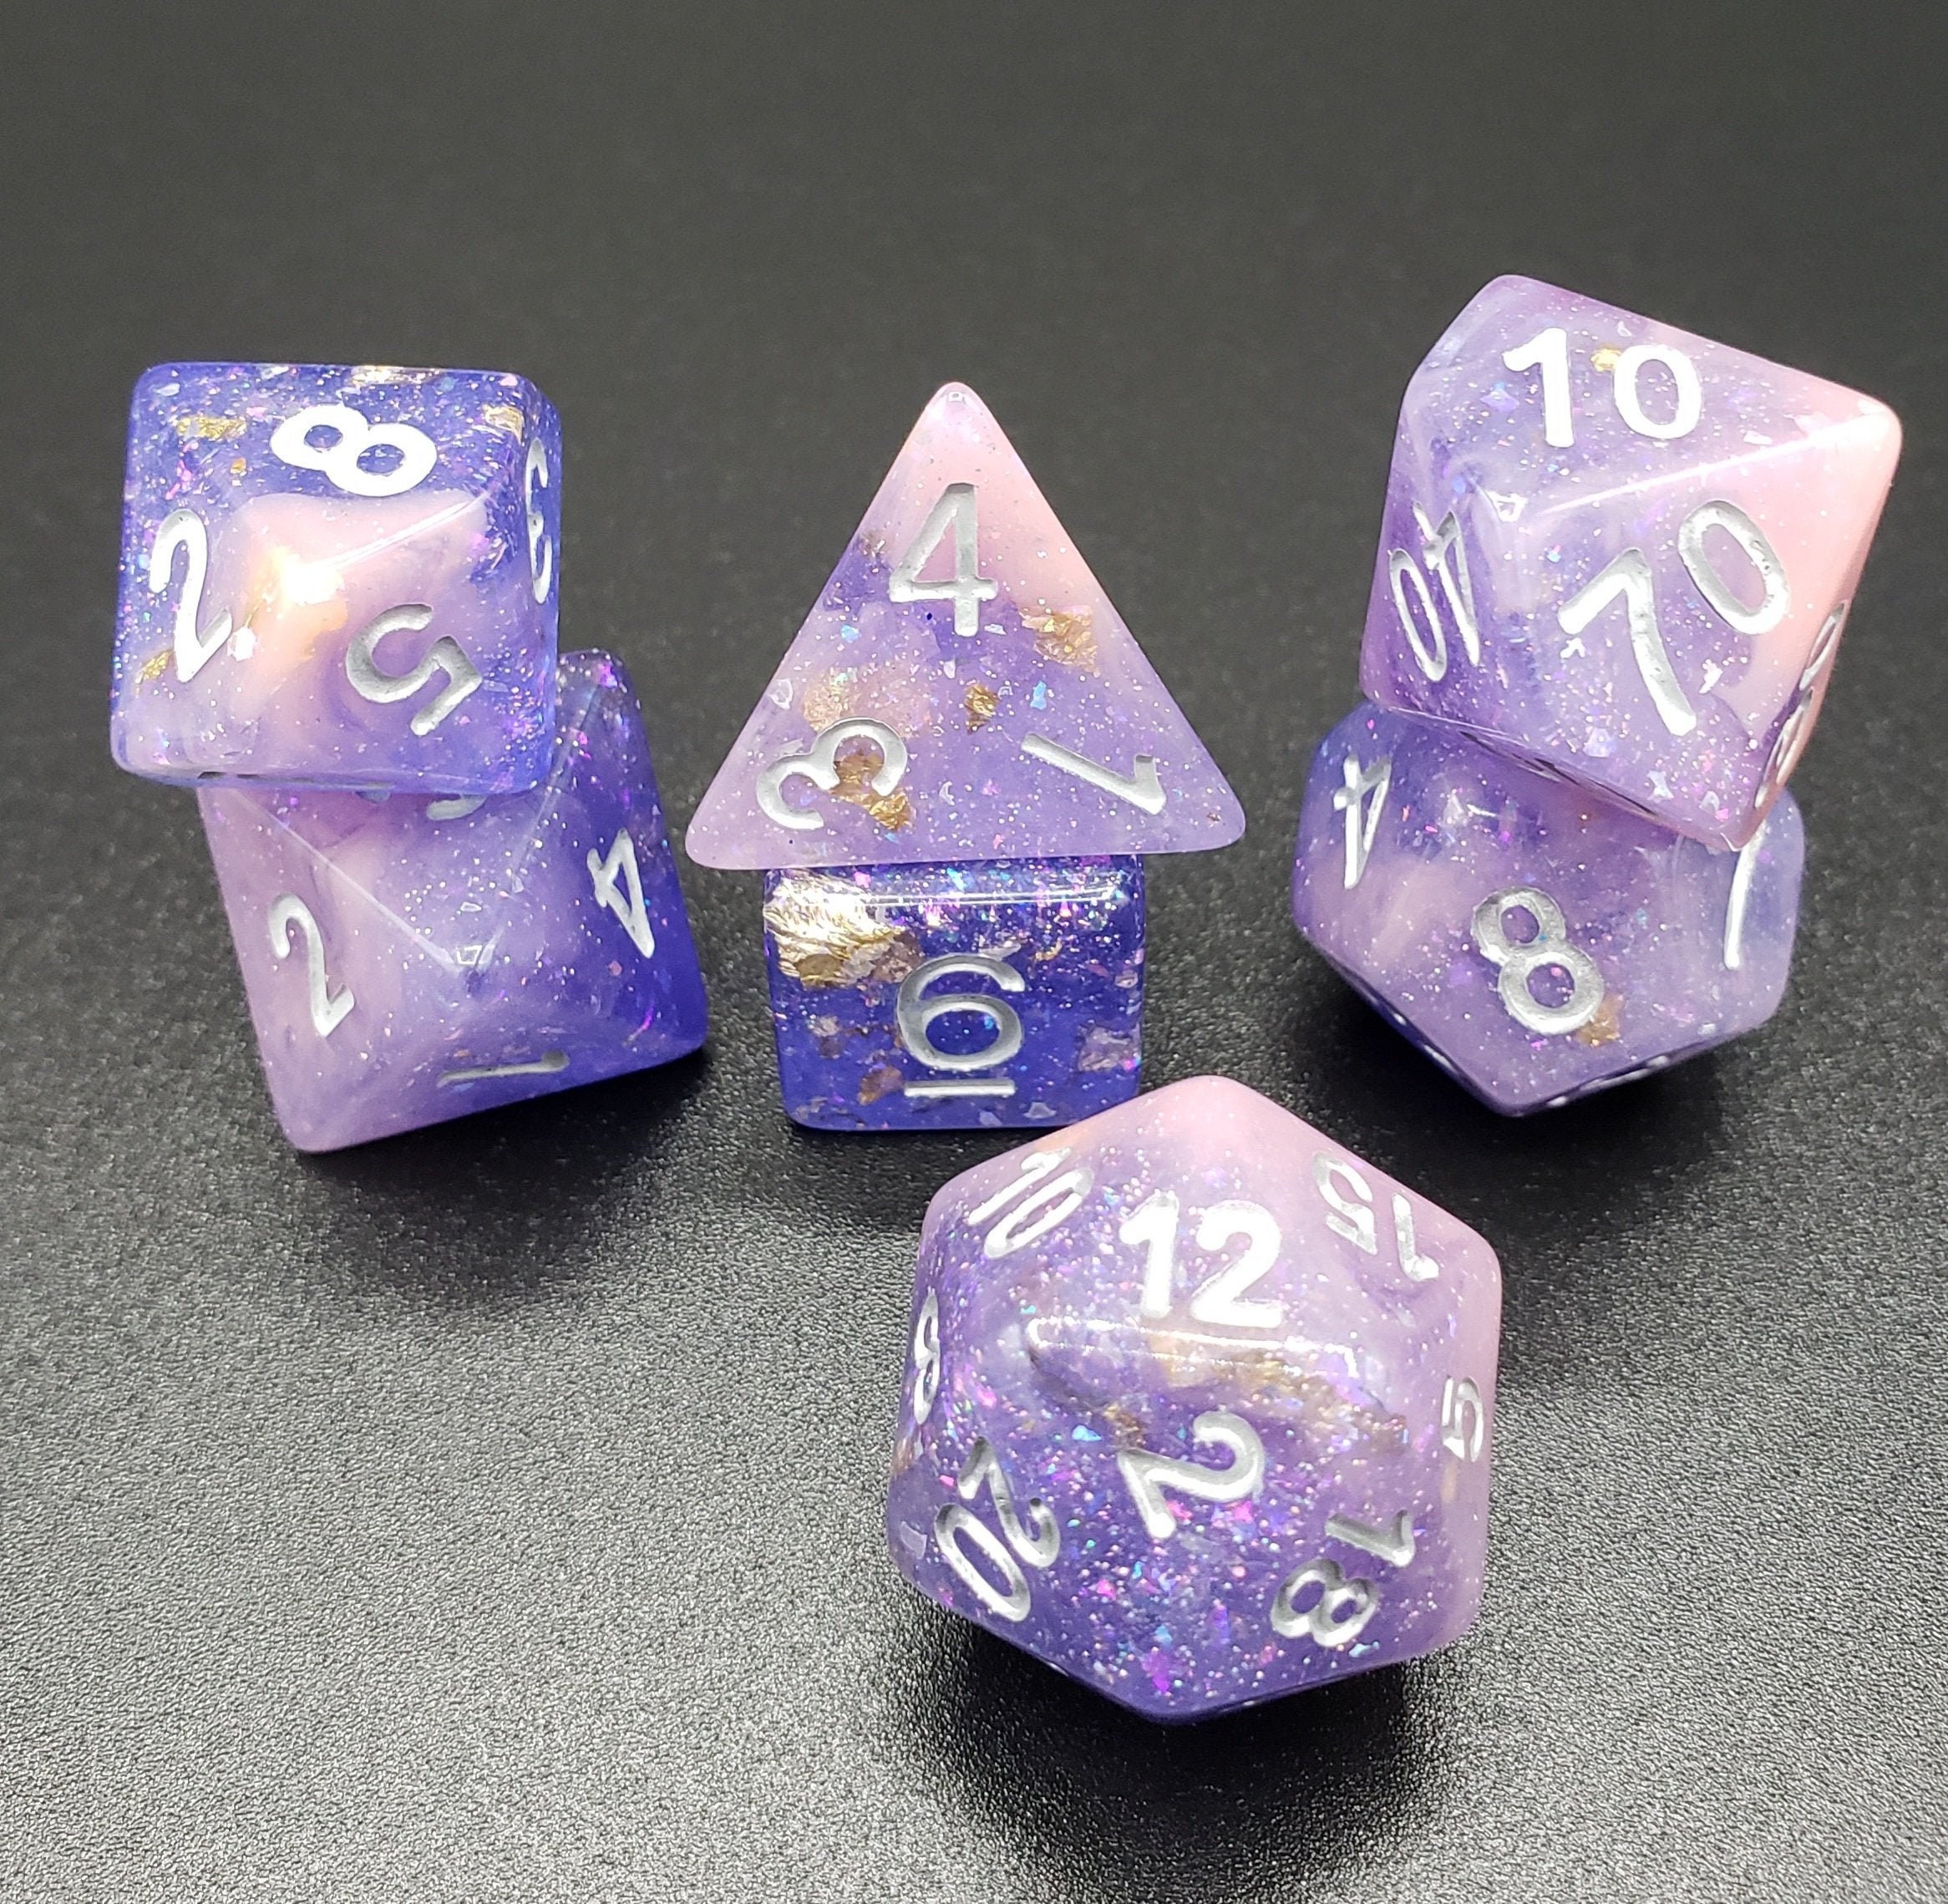 Twisted Blue-Green NEW RPG Dice Set of 5 D20 